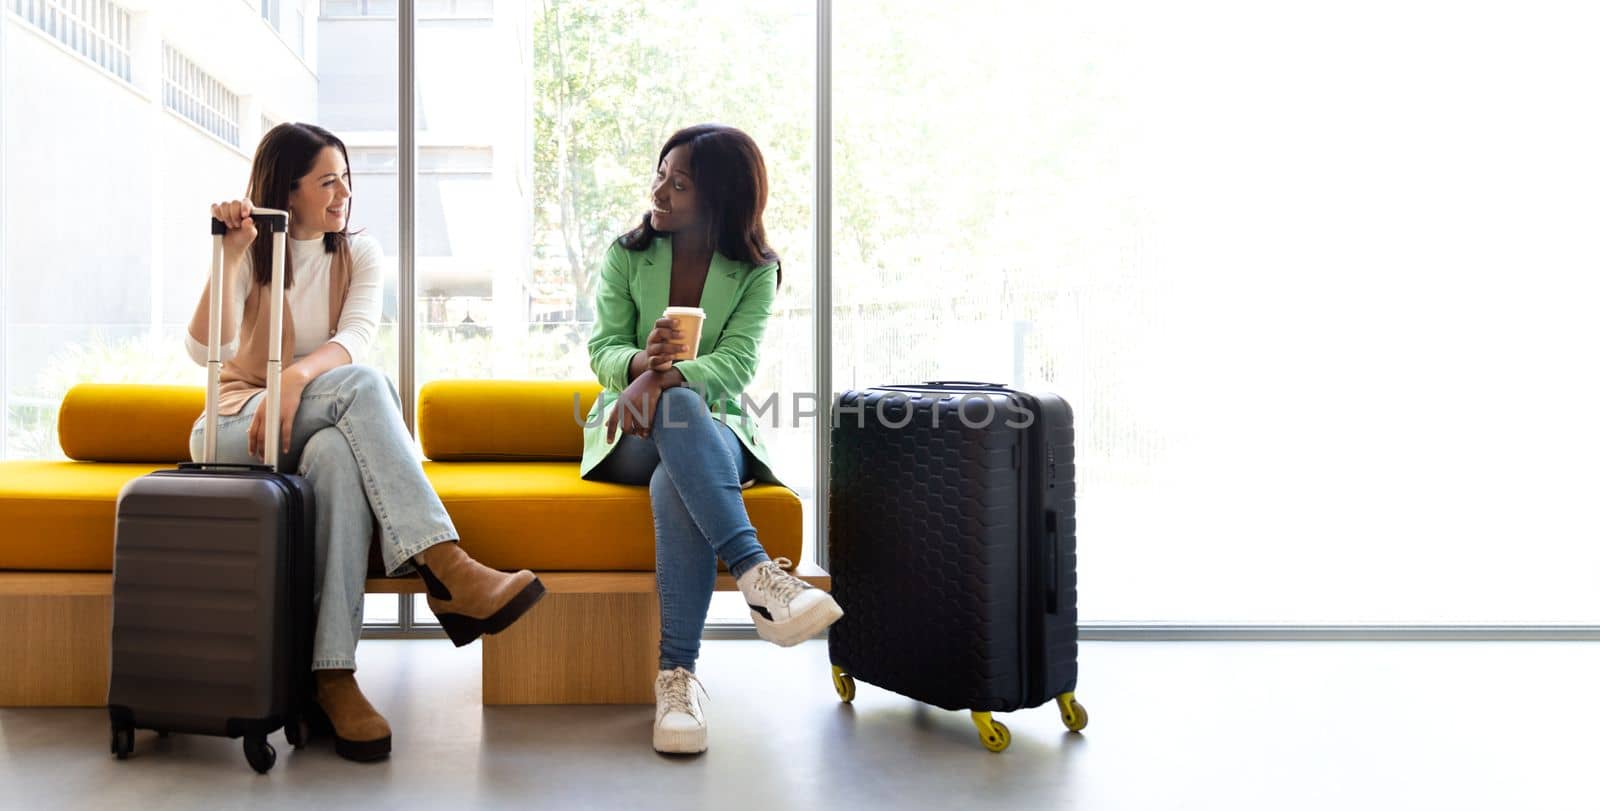 Horizontal banner image of multiracial women sitting on hotel reception bench talking. Copy space. by Hoverstock